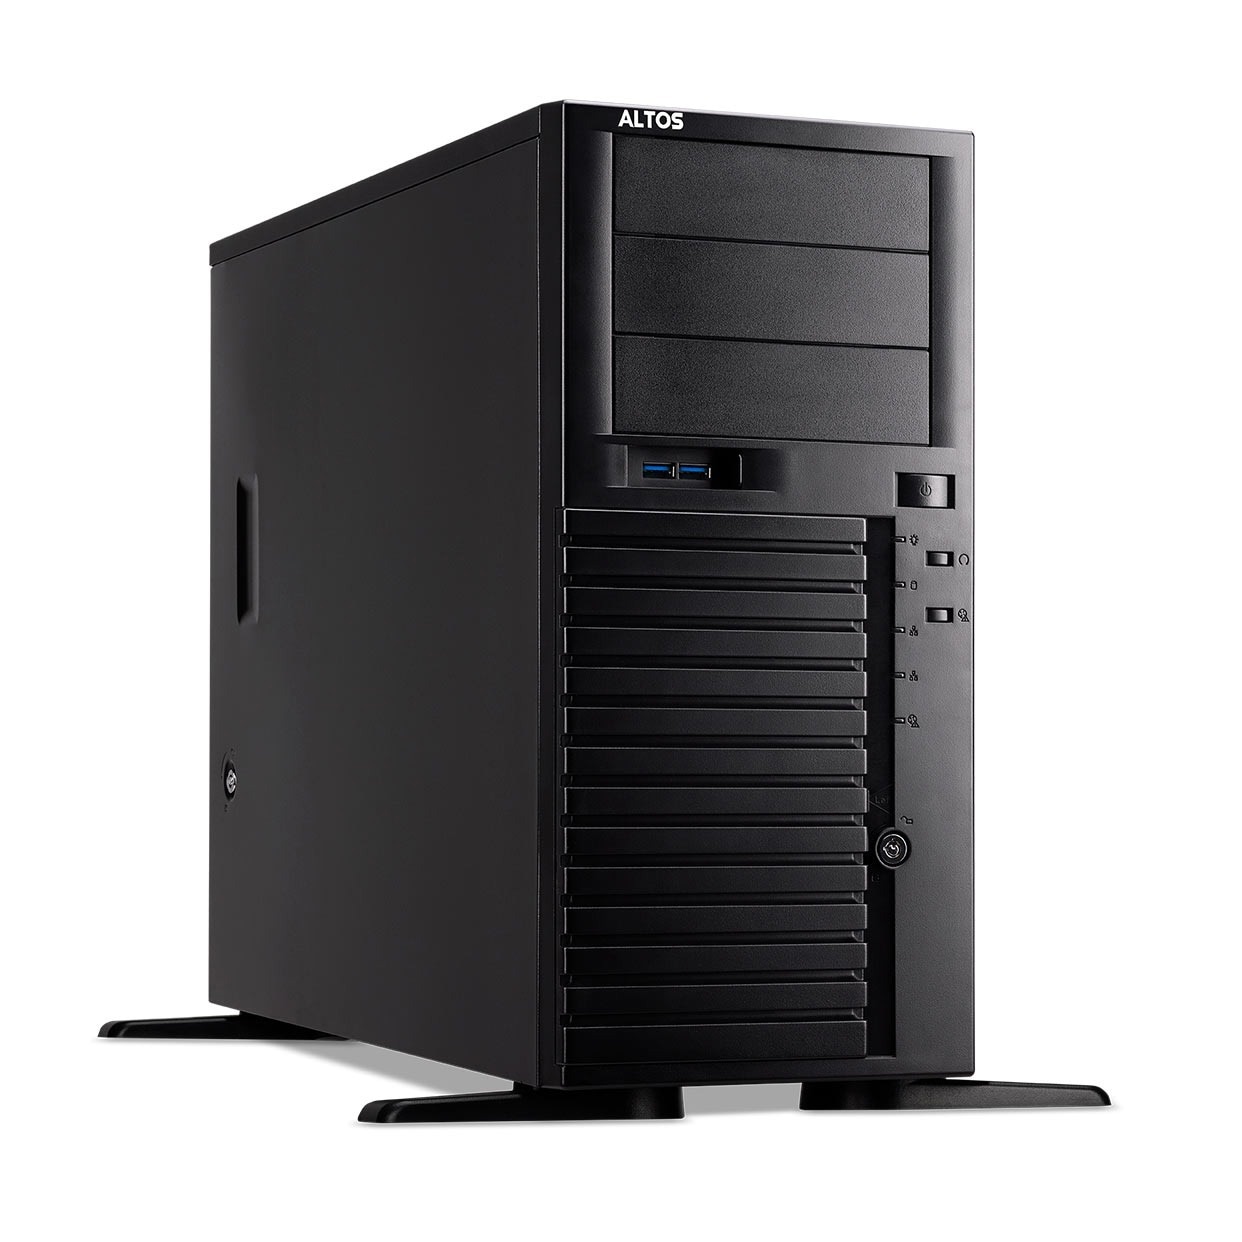 Altos BrainSphere™ T310 F5 Server: The Perfect Server for High-Performance and Expandability